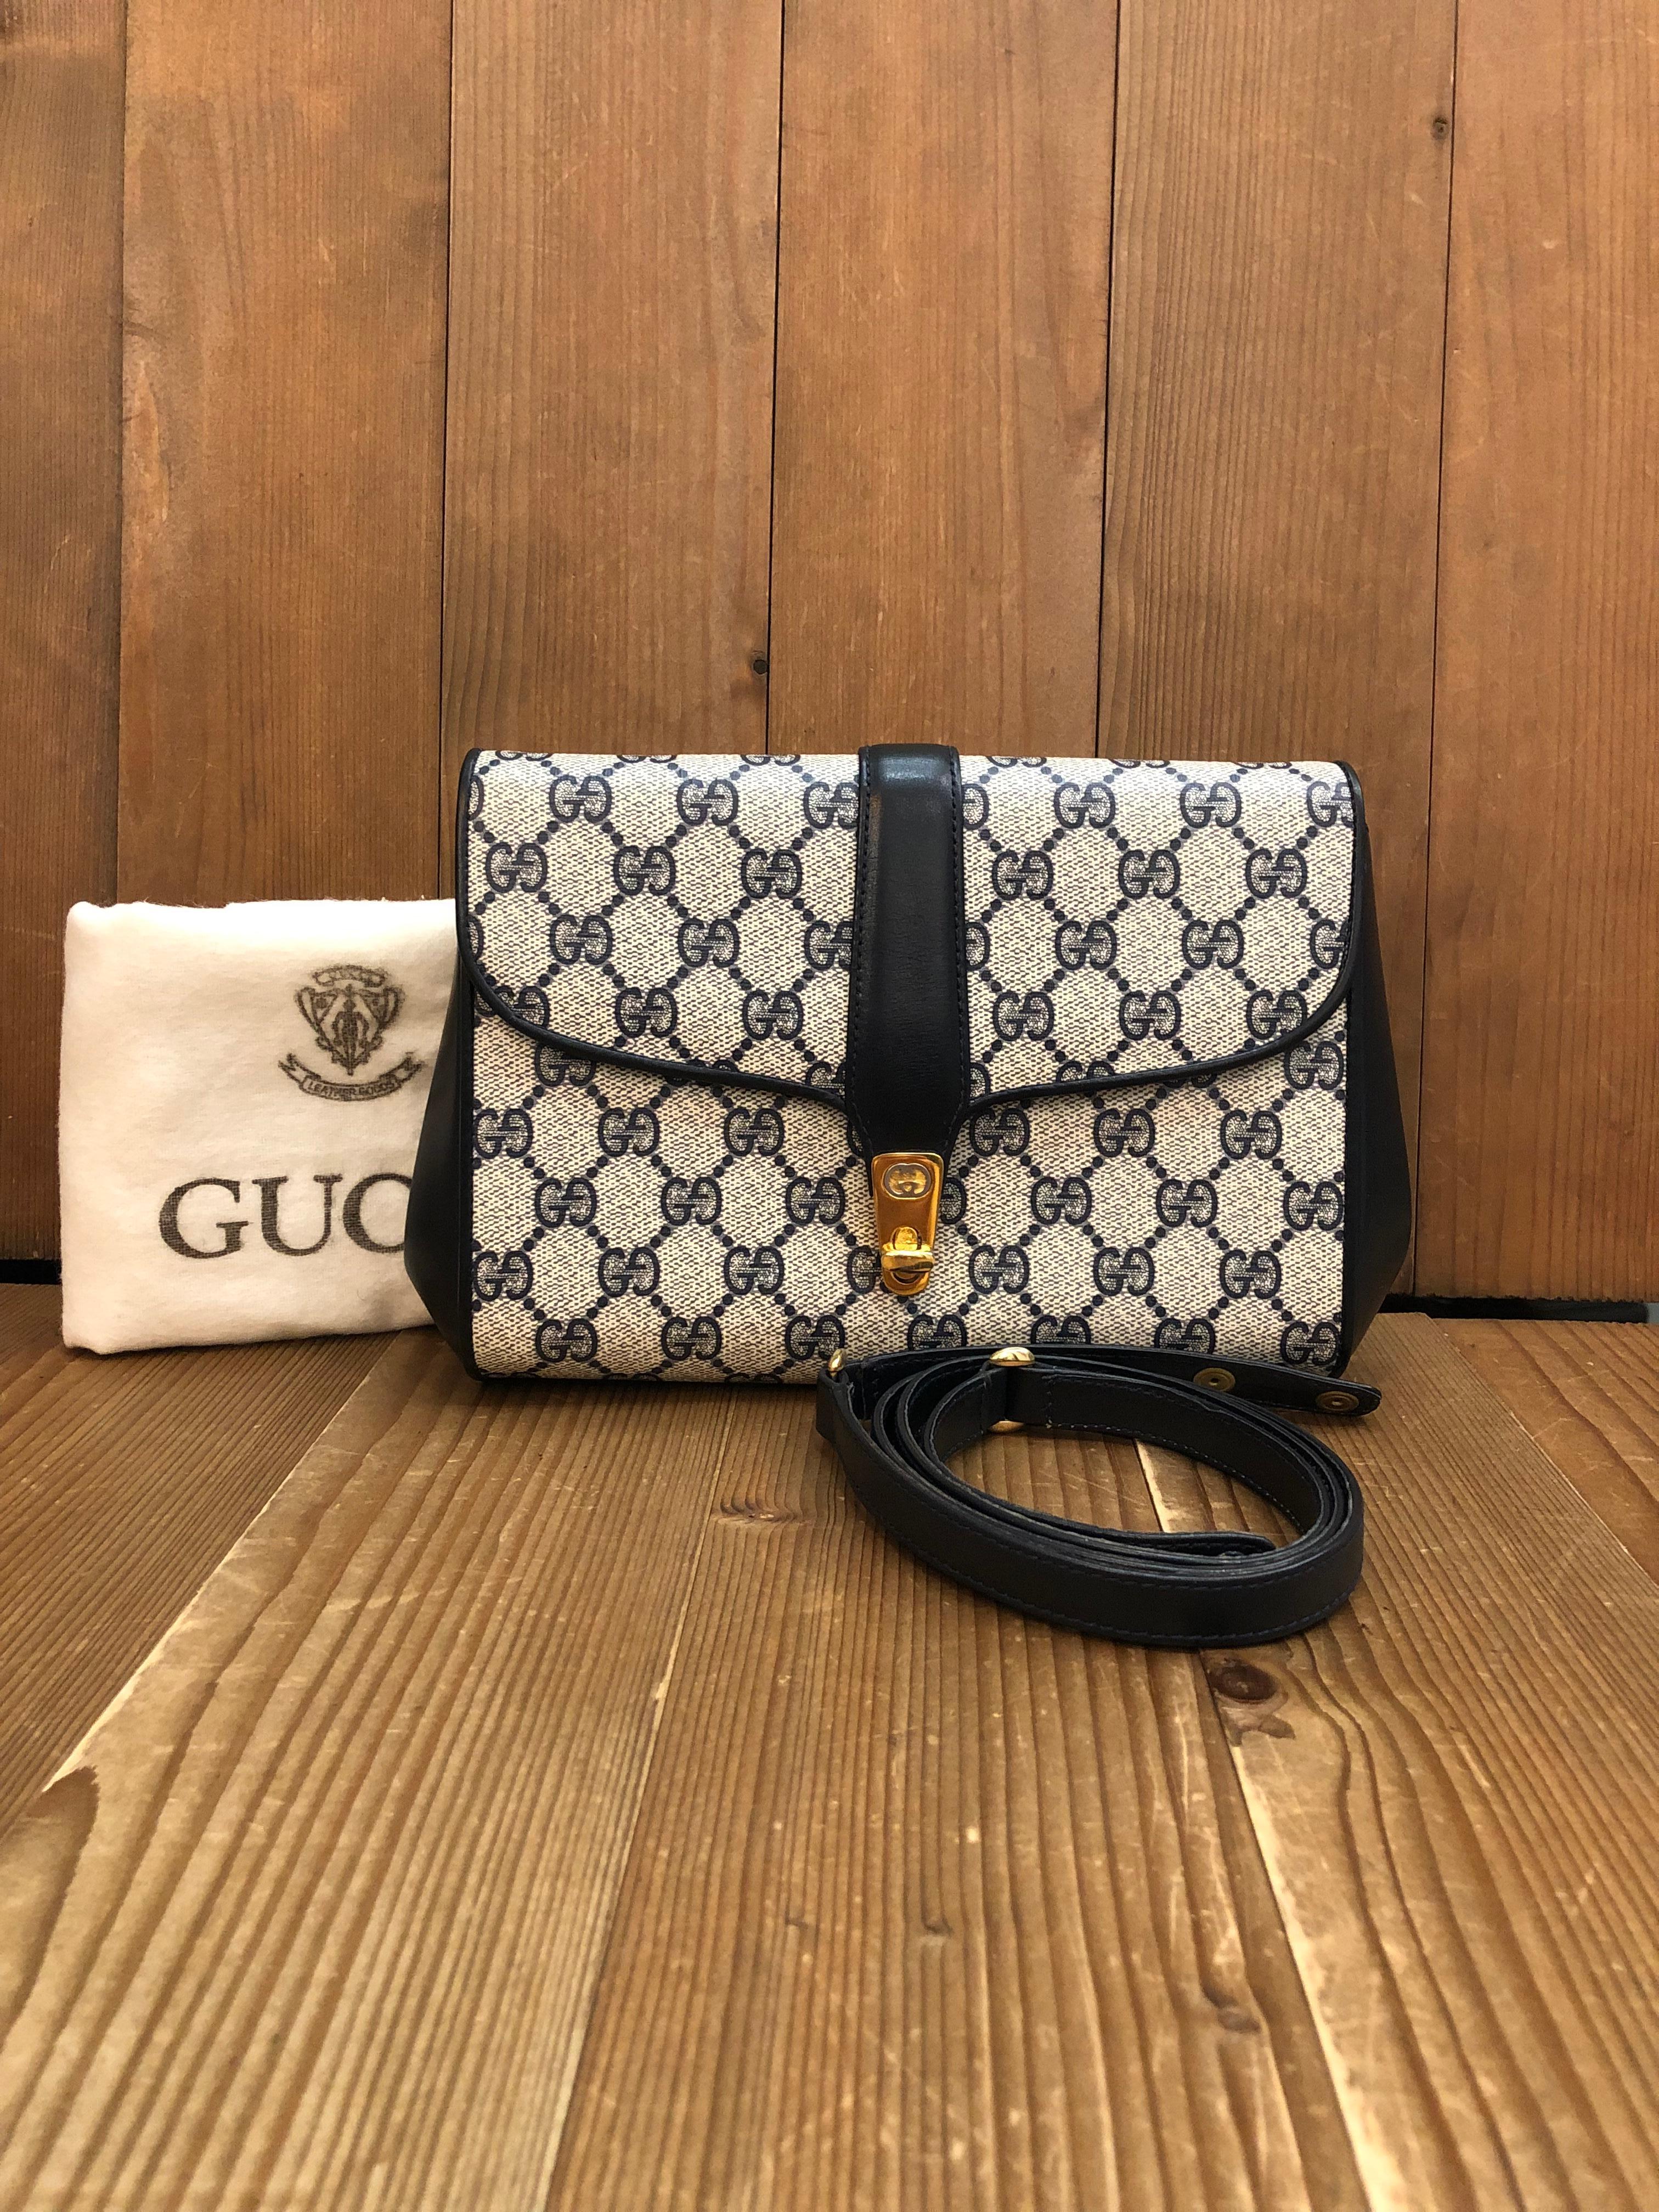 This Vintage GUCCI 2-way clutch shoulder bag is crafted of GG monogram canvas in navy trimmed with navy smooth leather featuring a gold toned turnlock and a silver toned GG logo. Front flap turnlock closure opens to a leather interior in navy